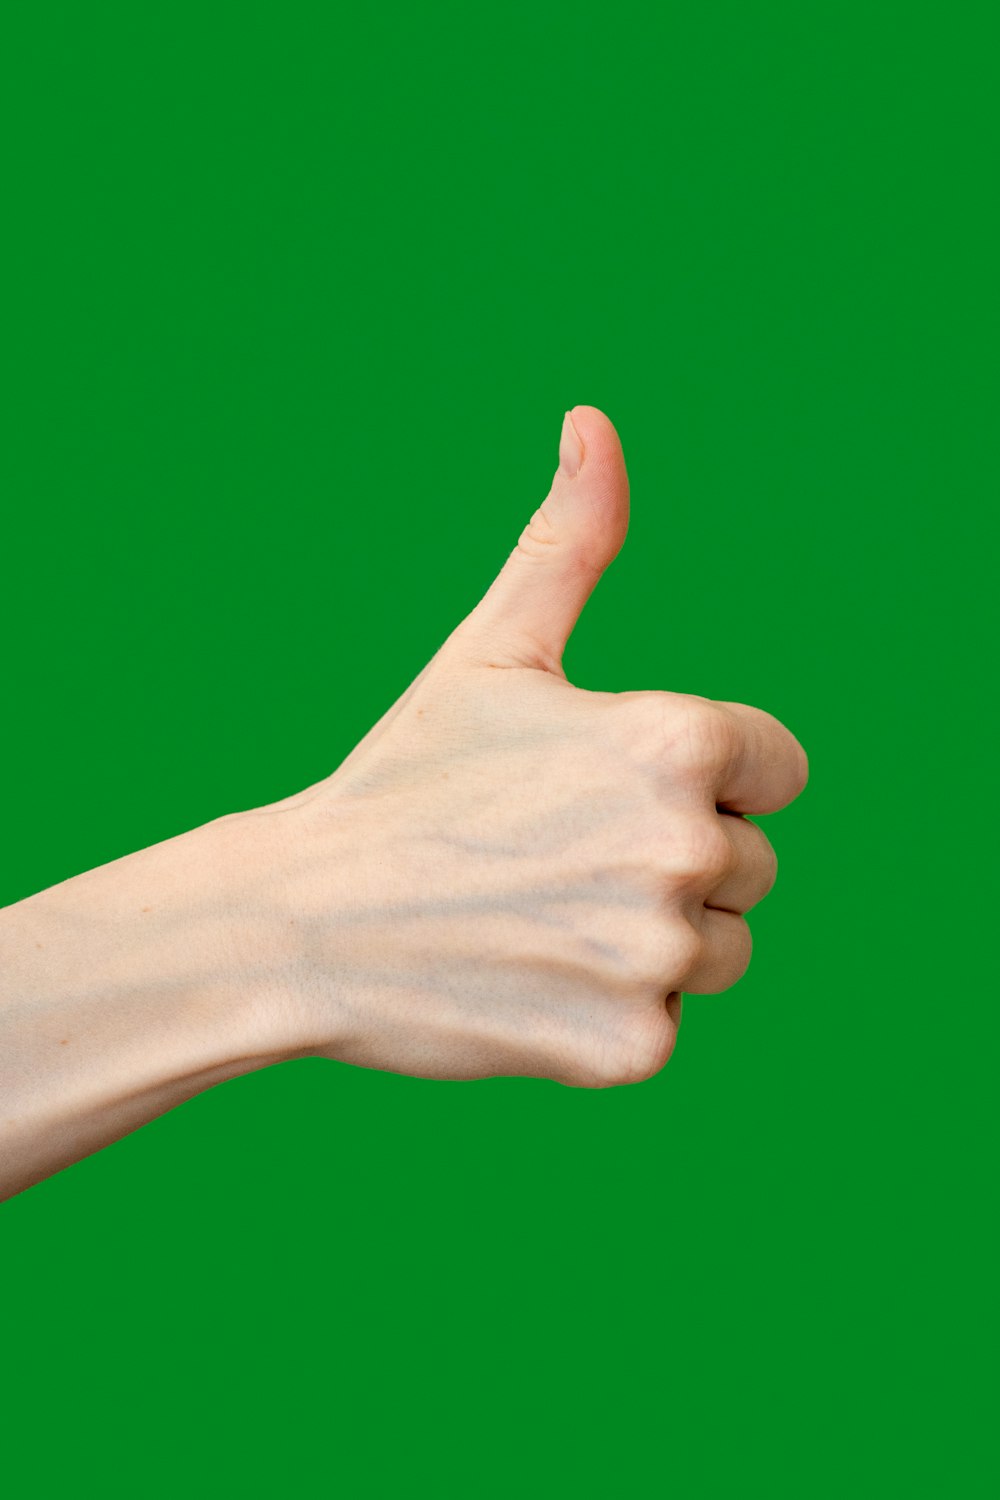 a hand giving a thumbs up sign against a green background